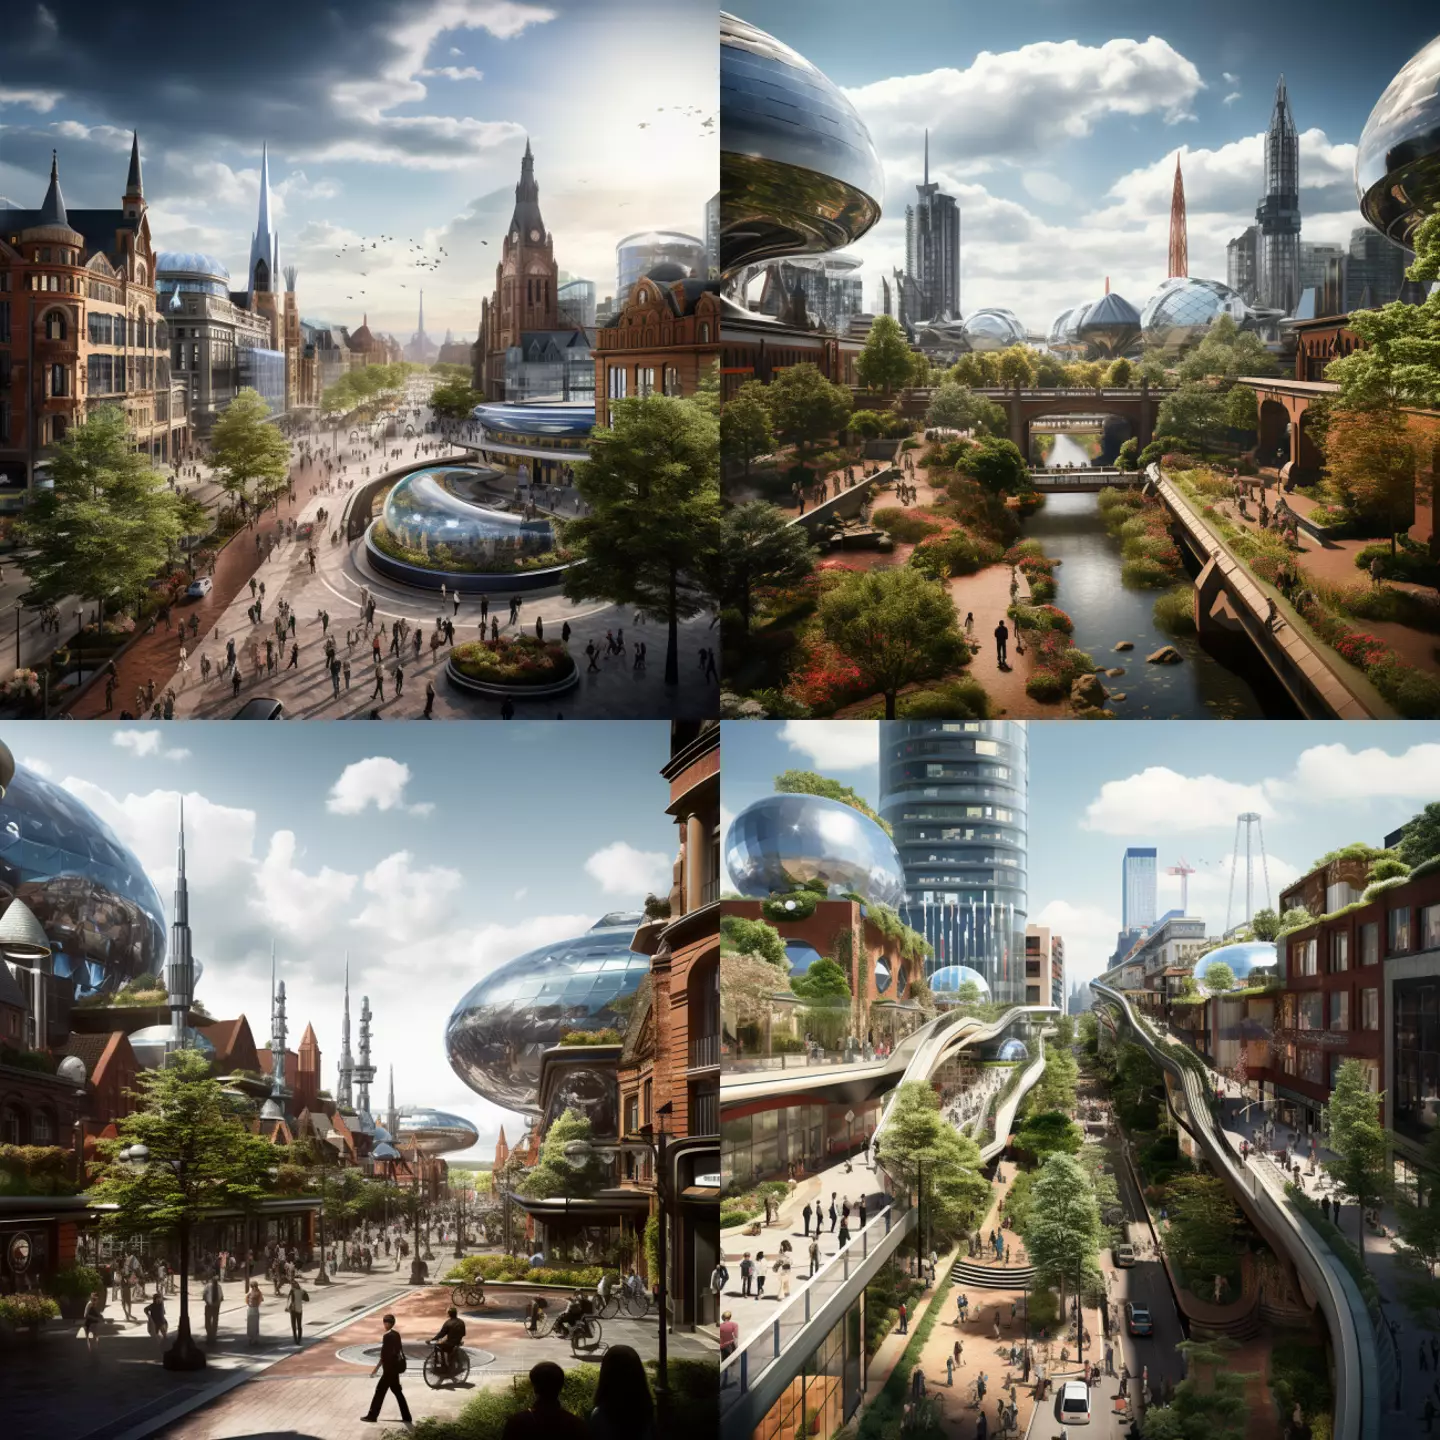 Here's what the AI reckons for Birmingham.